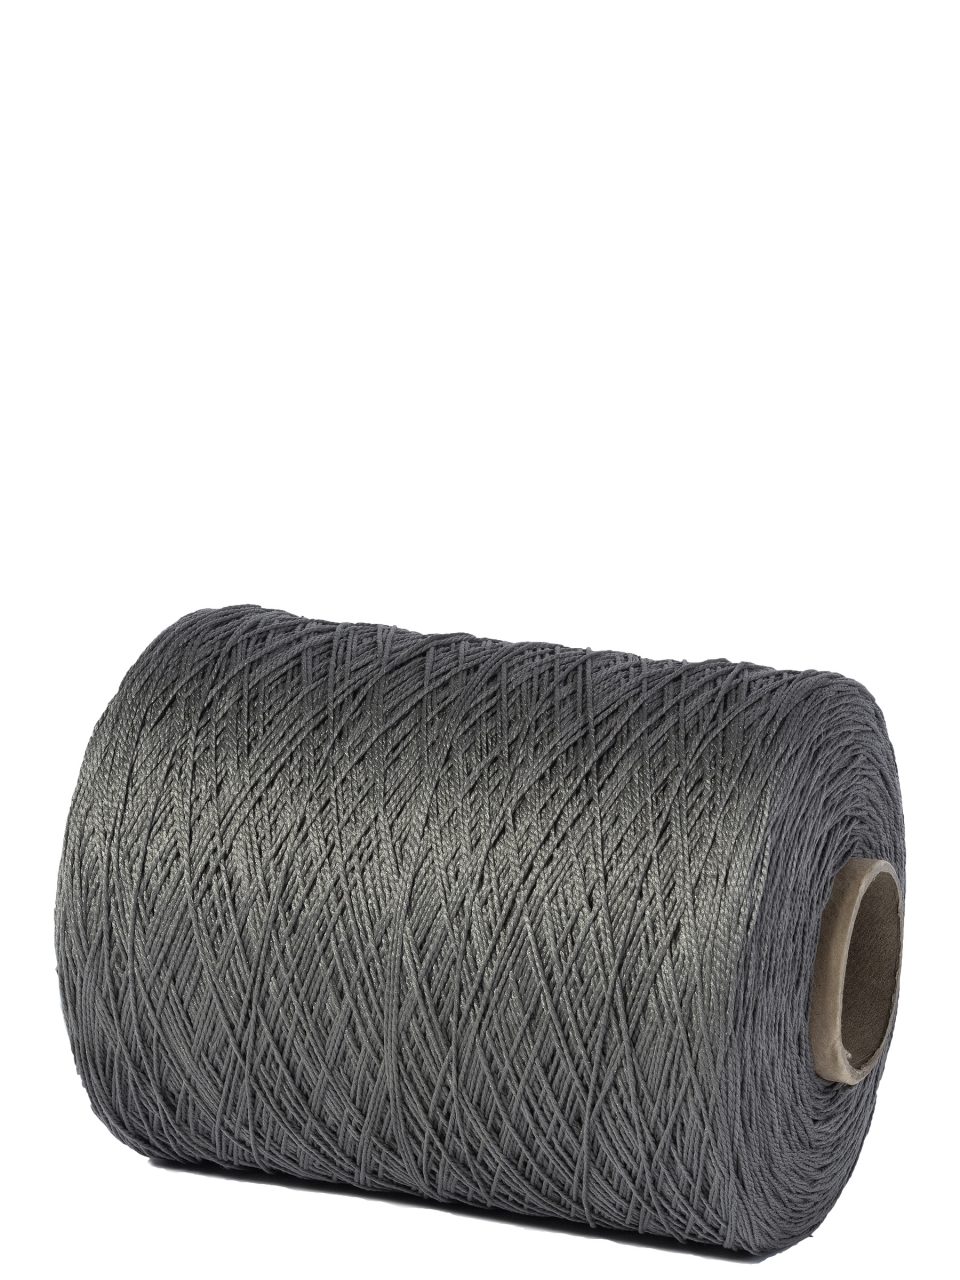 НИТКА 3 КГ FRIZE - 9120 - GRAY